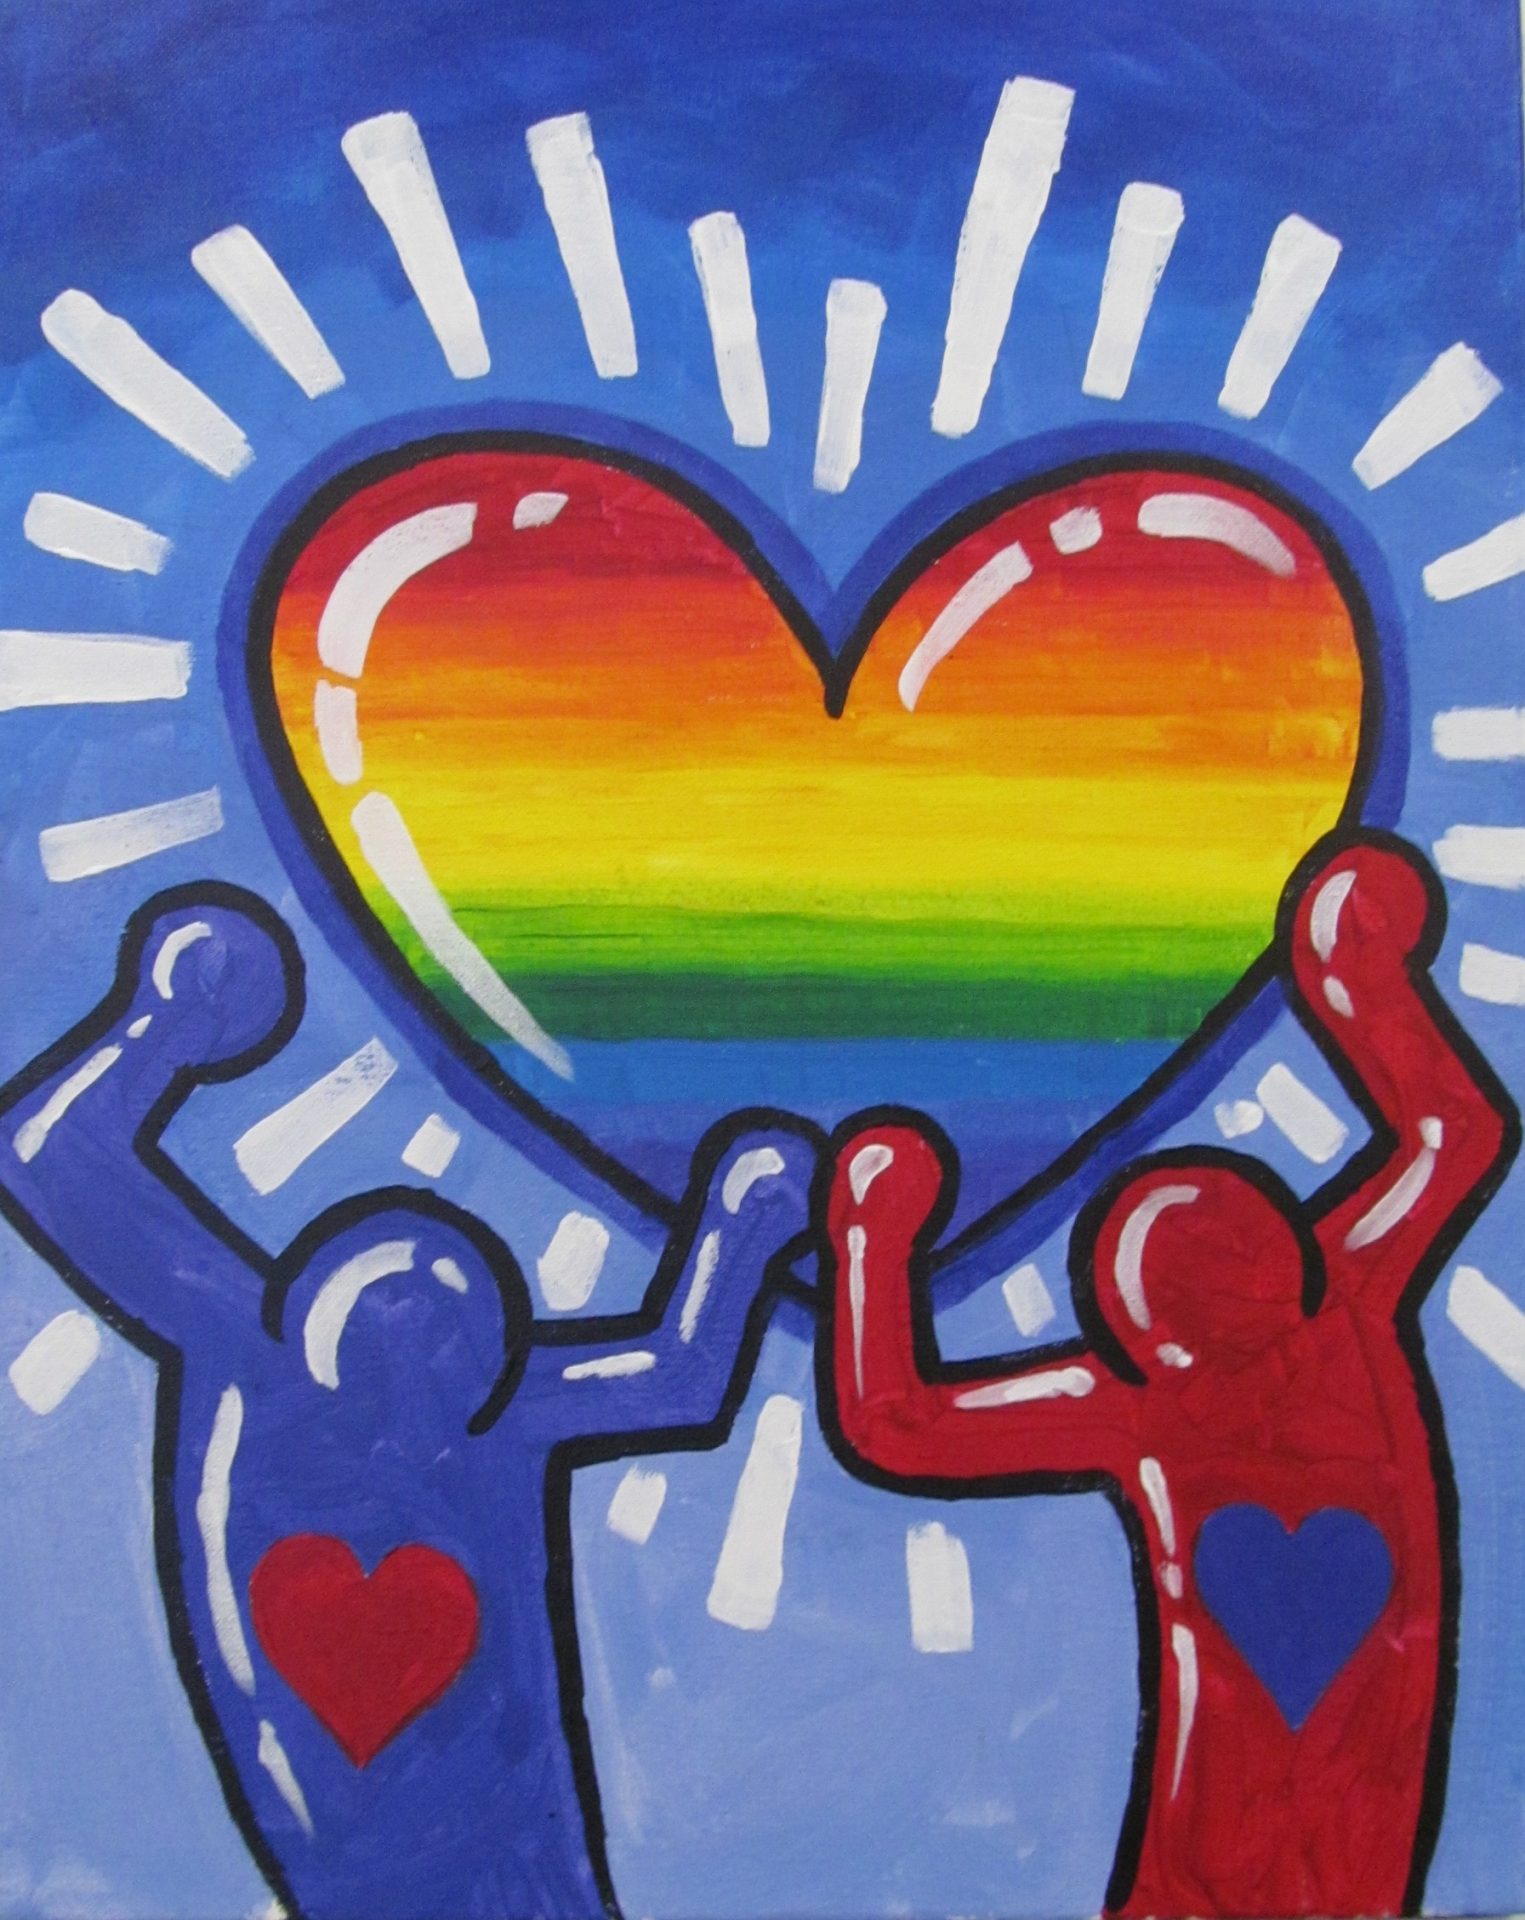 Keith Haring-inspired figures hold up a heart with the colors of the Pride Flag